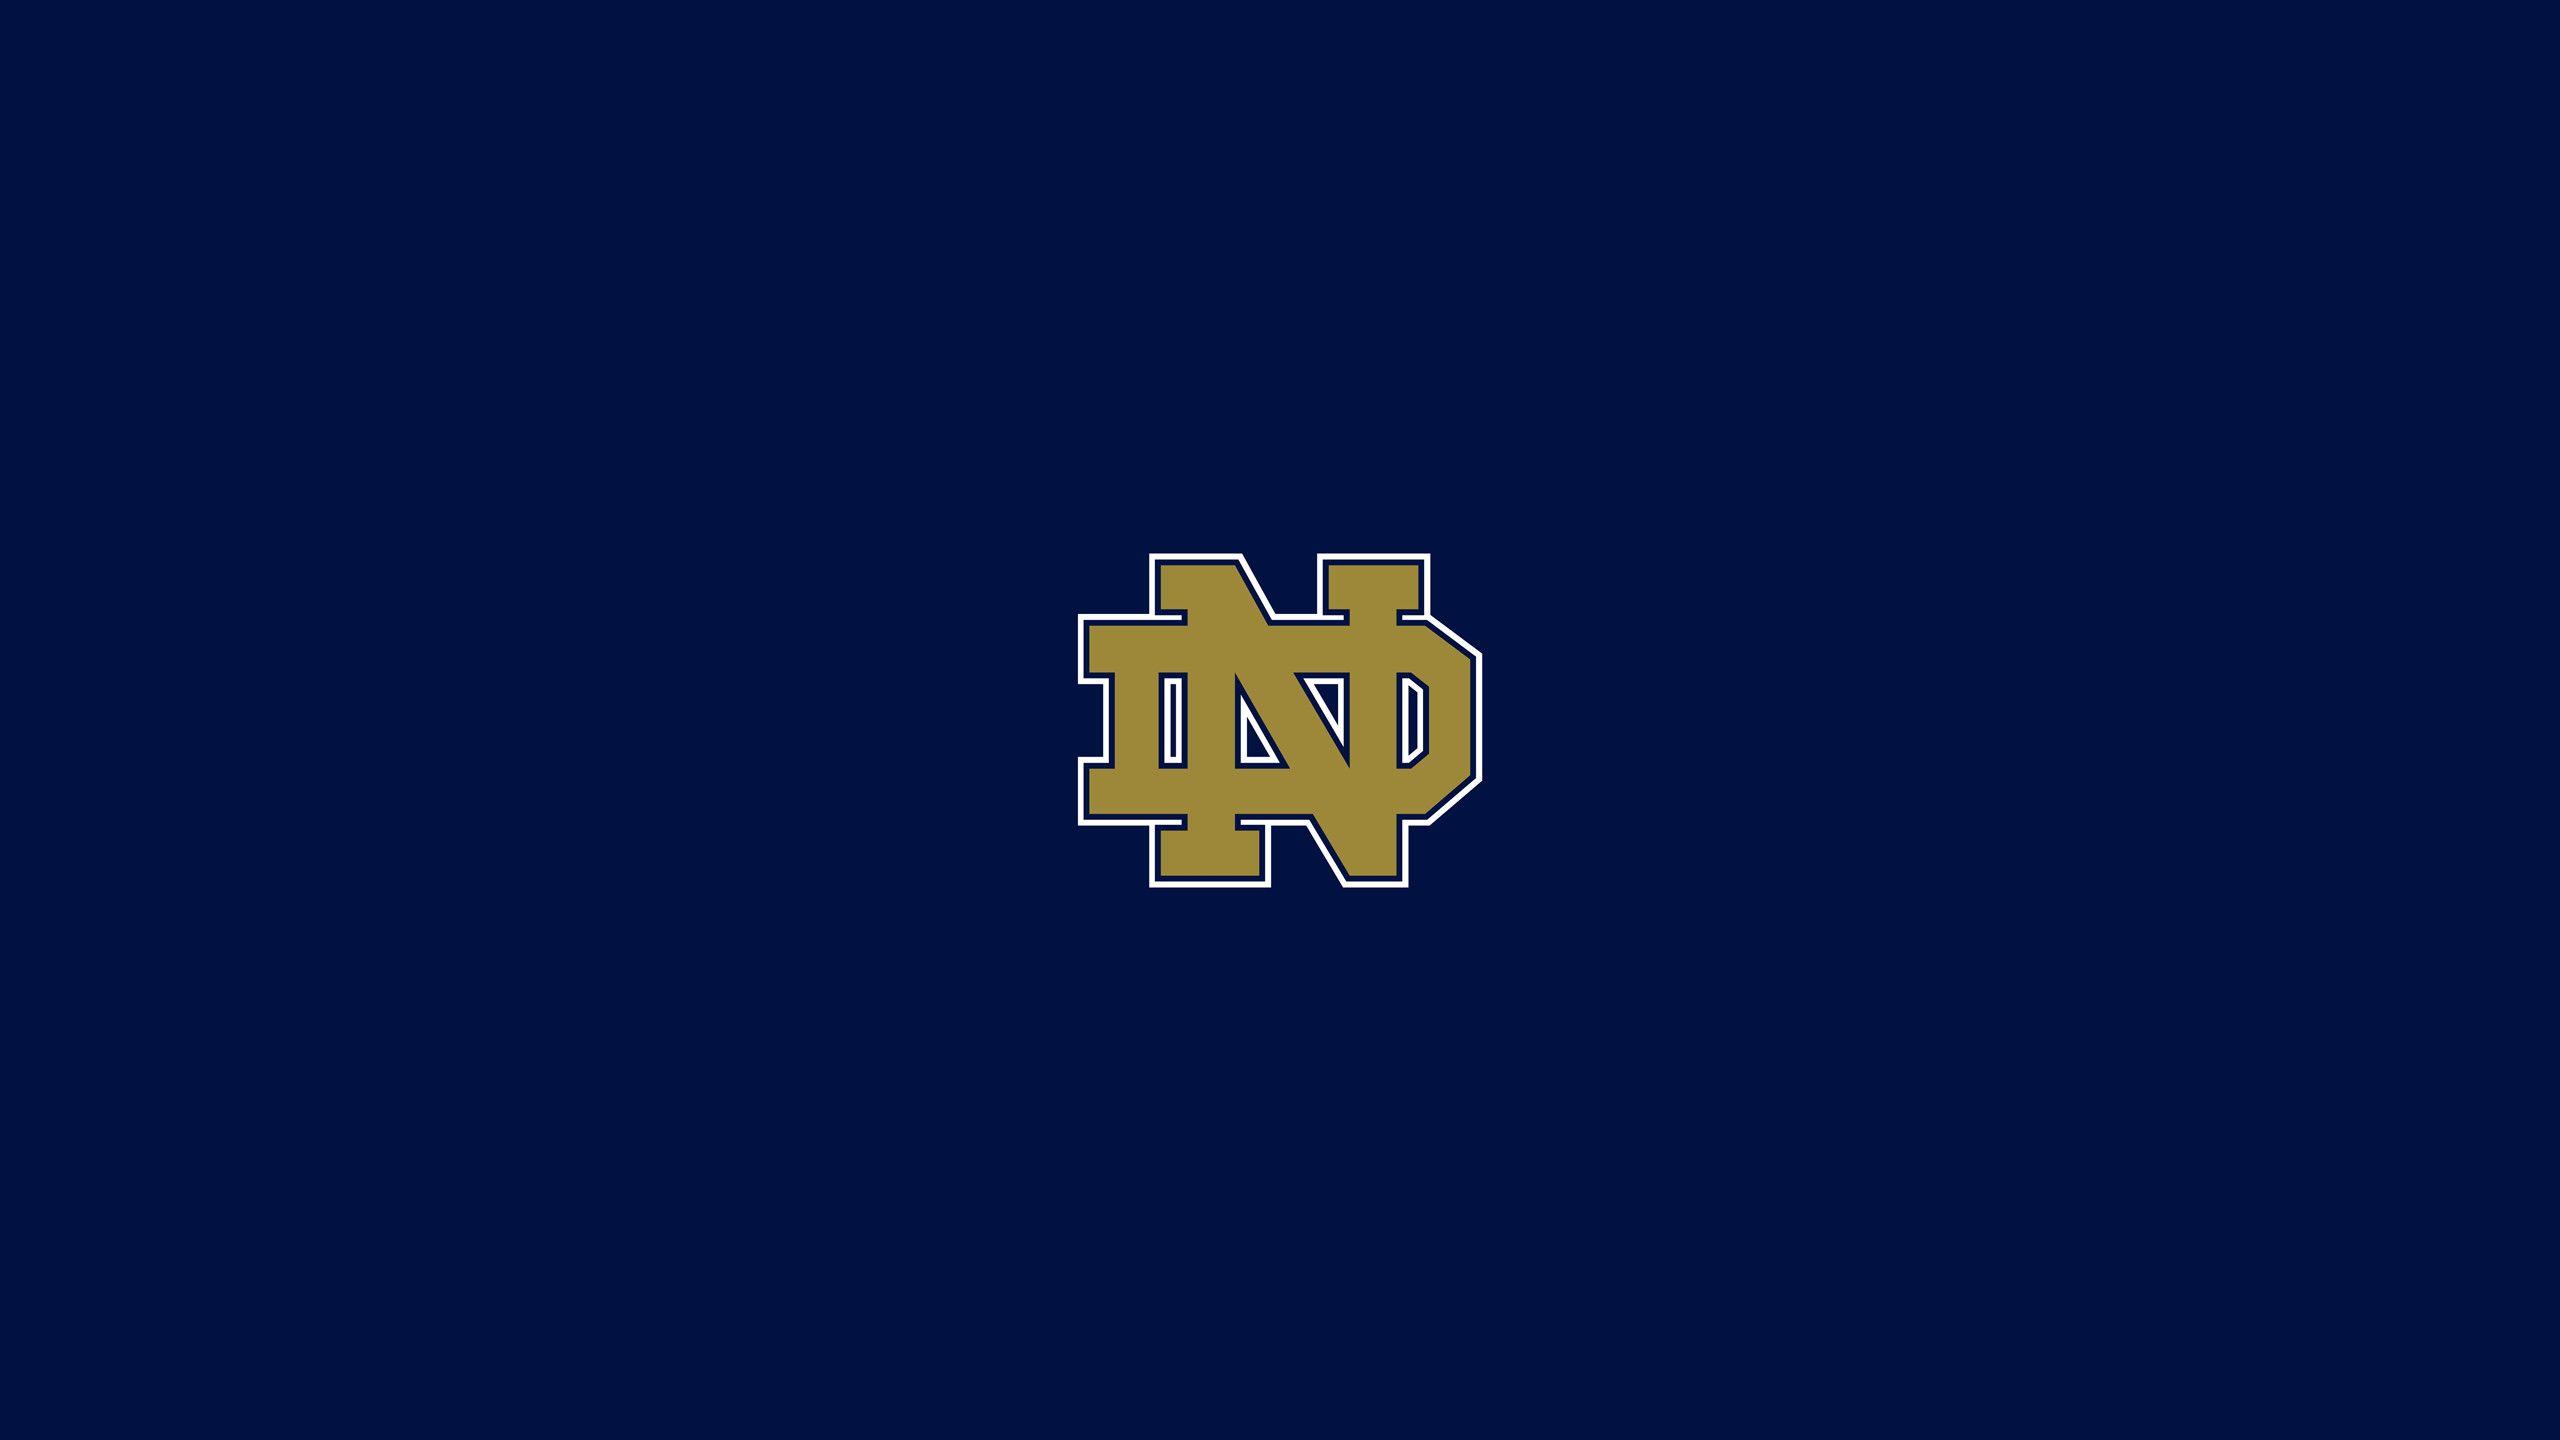 Notre Dame Football IPhone Wallpaper 65 images